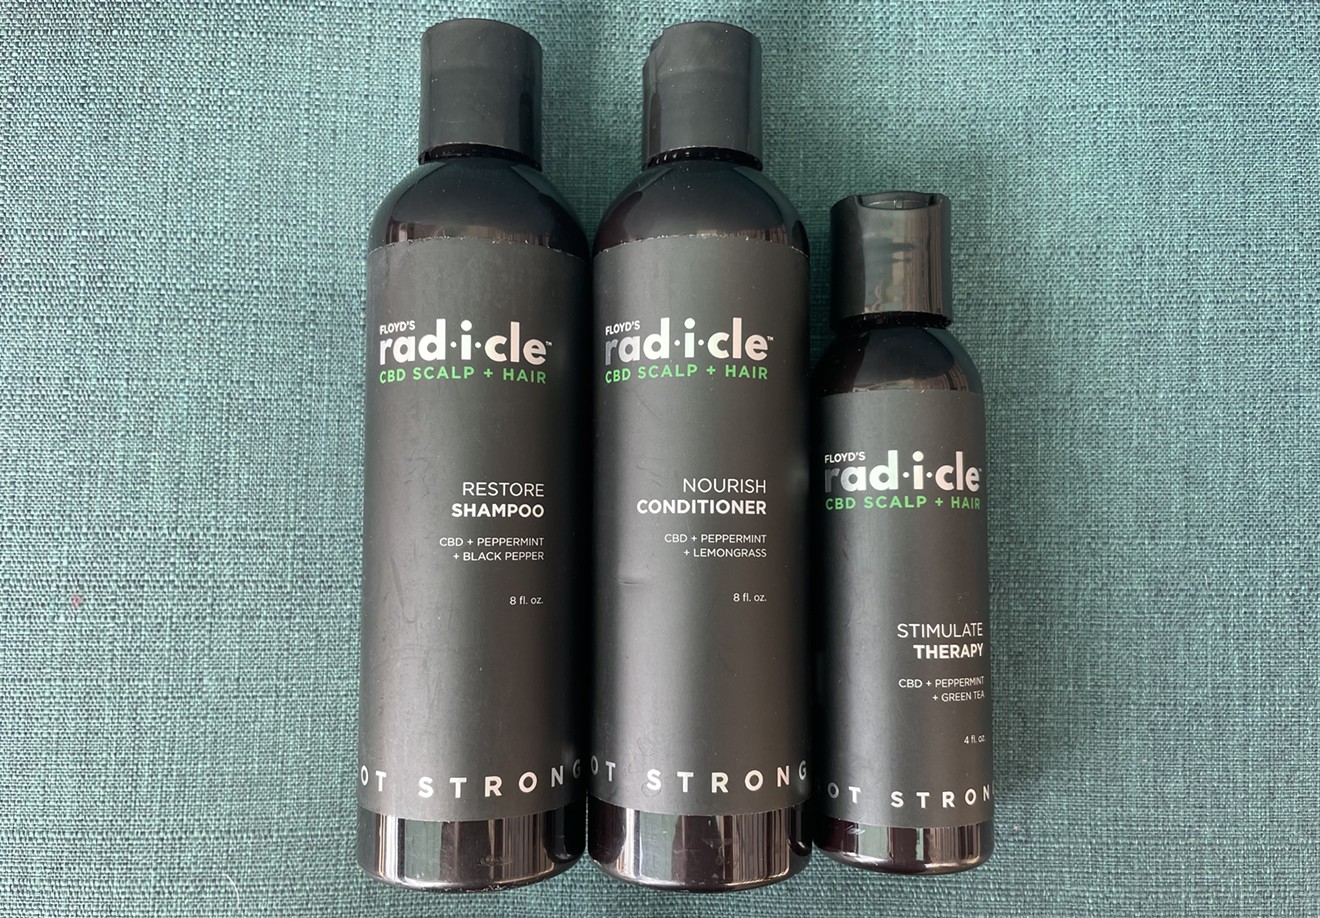 Rad.i.cle's shampoo, conditioner and stimulating scalp treatment are all infused with hemp-derived CBD.